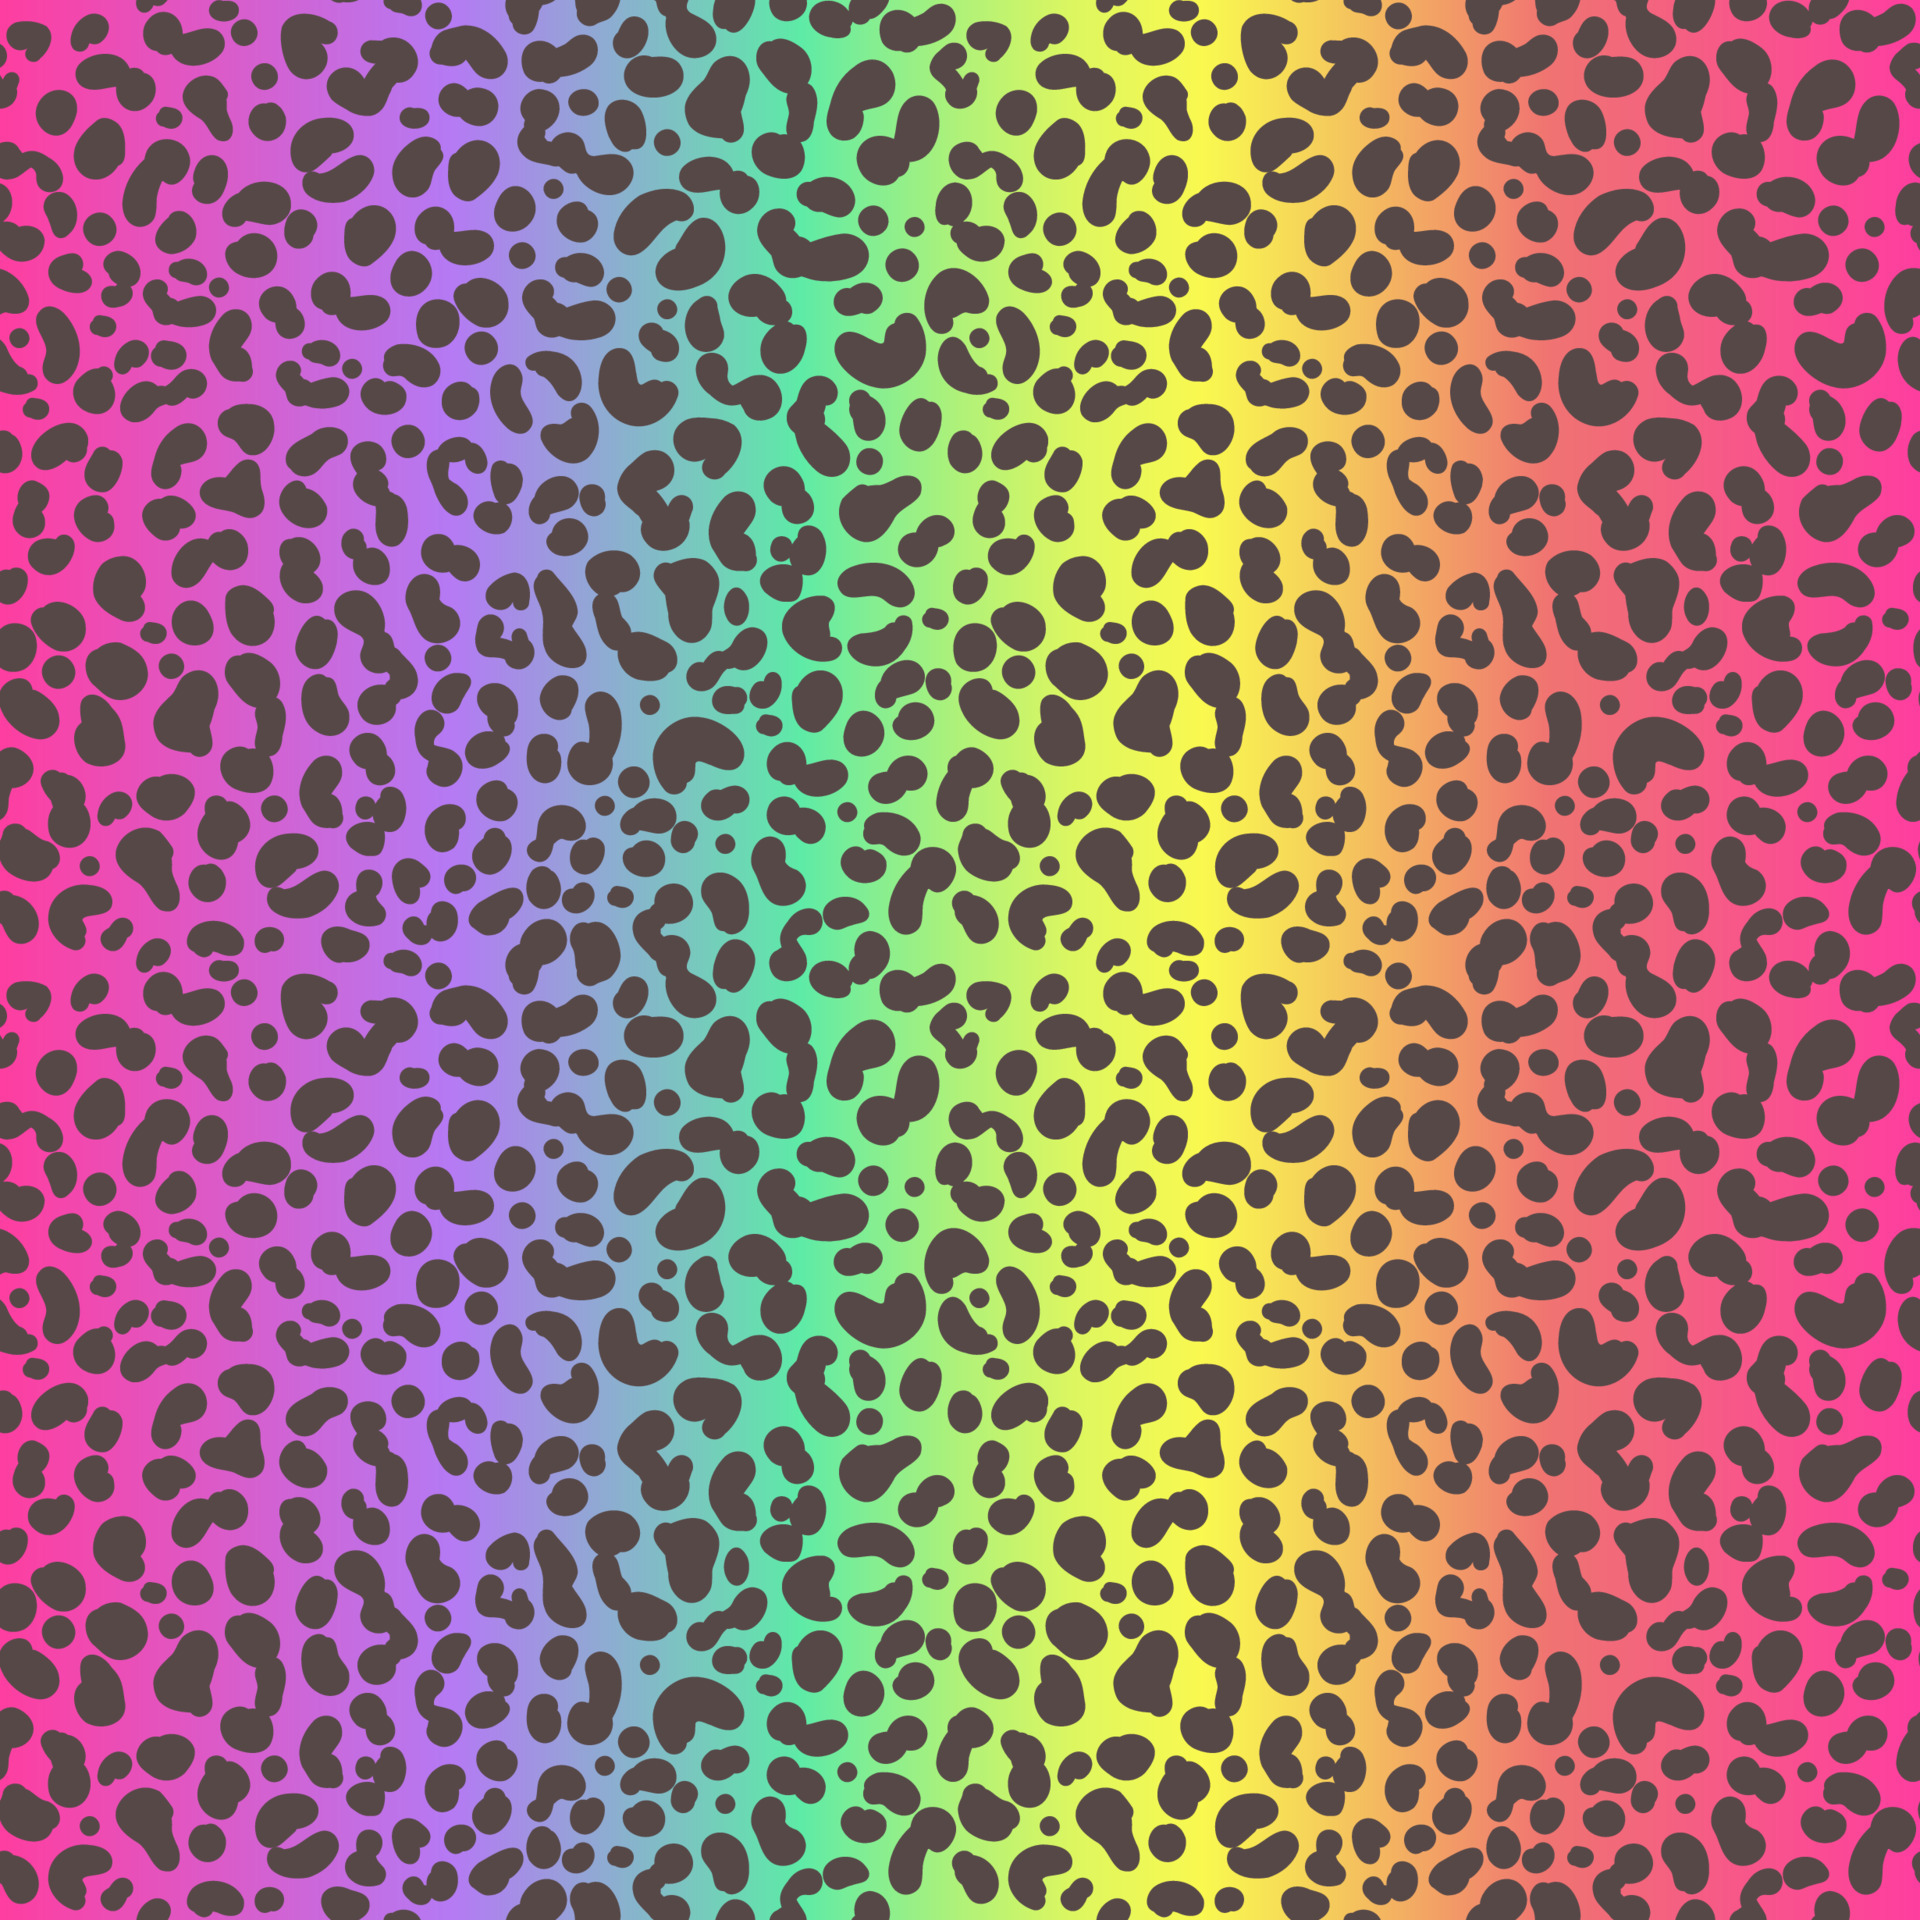 https://static.vecteezy.com/system/resources/previews/017/114/426/original/rainbow-cheetah-seamless-pattern-leopard-neon-print-animal-spotted-skin-background-vector.jpg